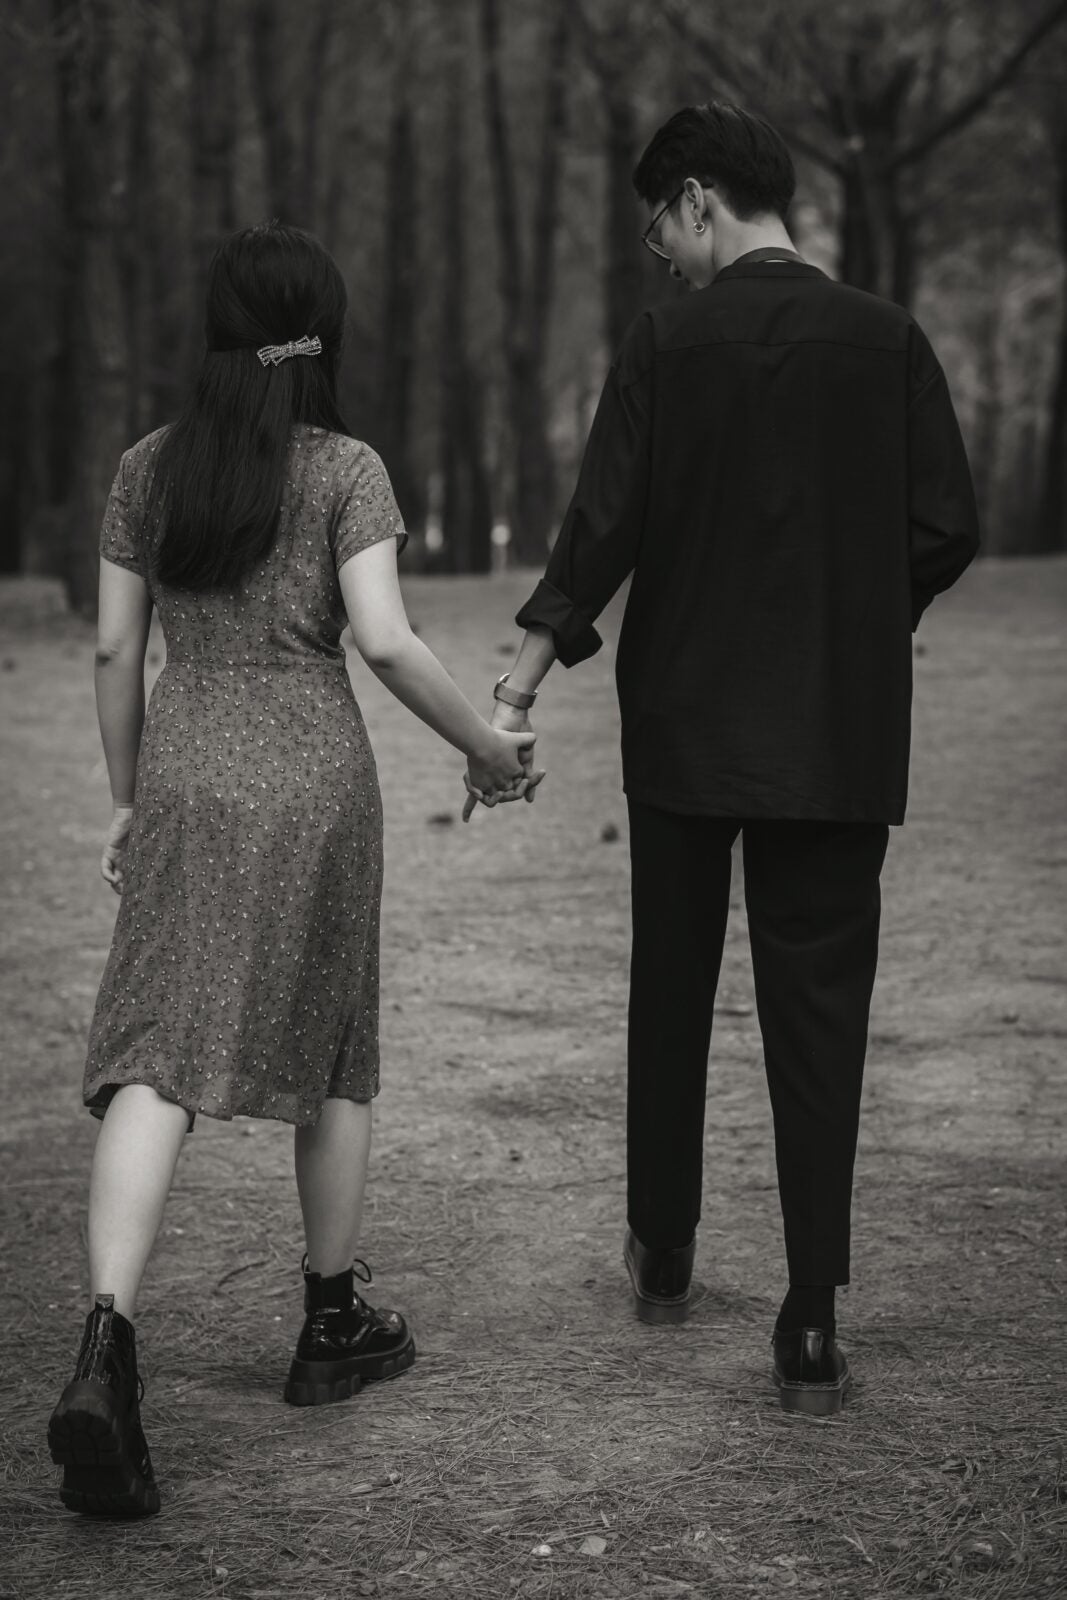 Black and white image of a woman in a dress and a man holding hands while walking in a park.